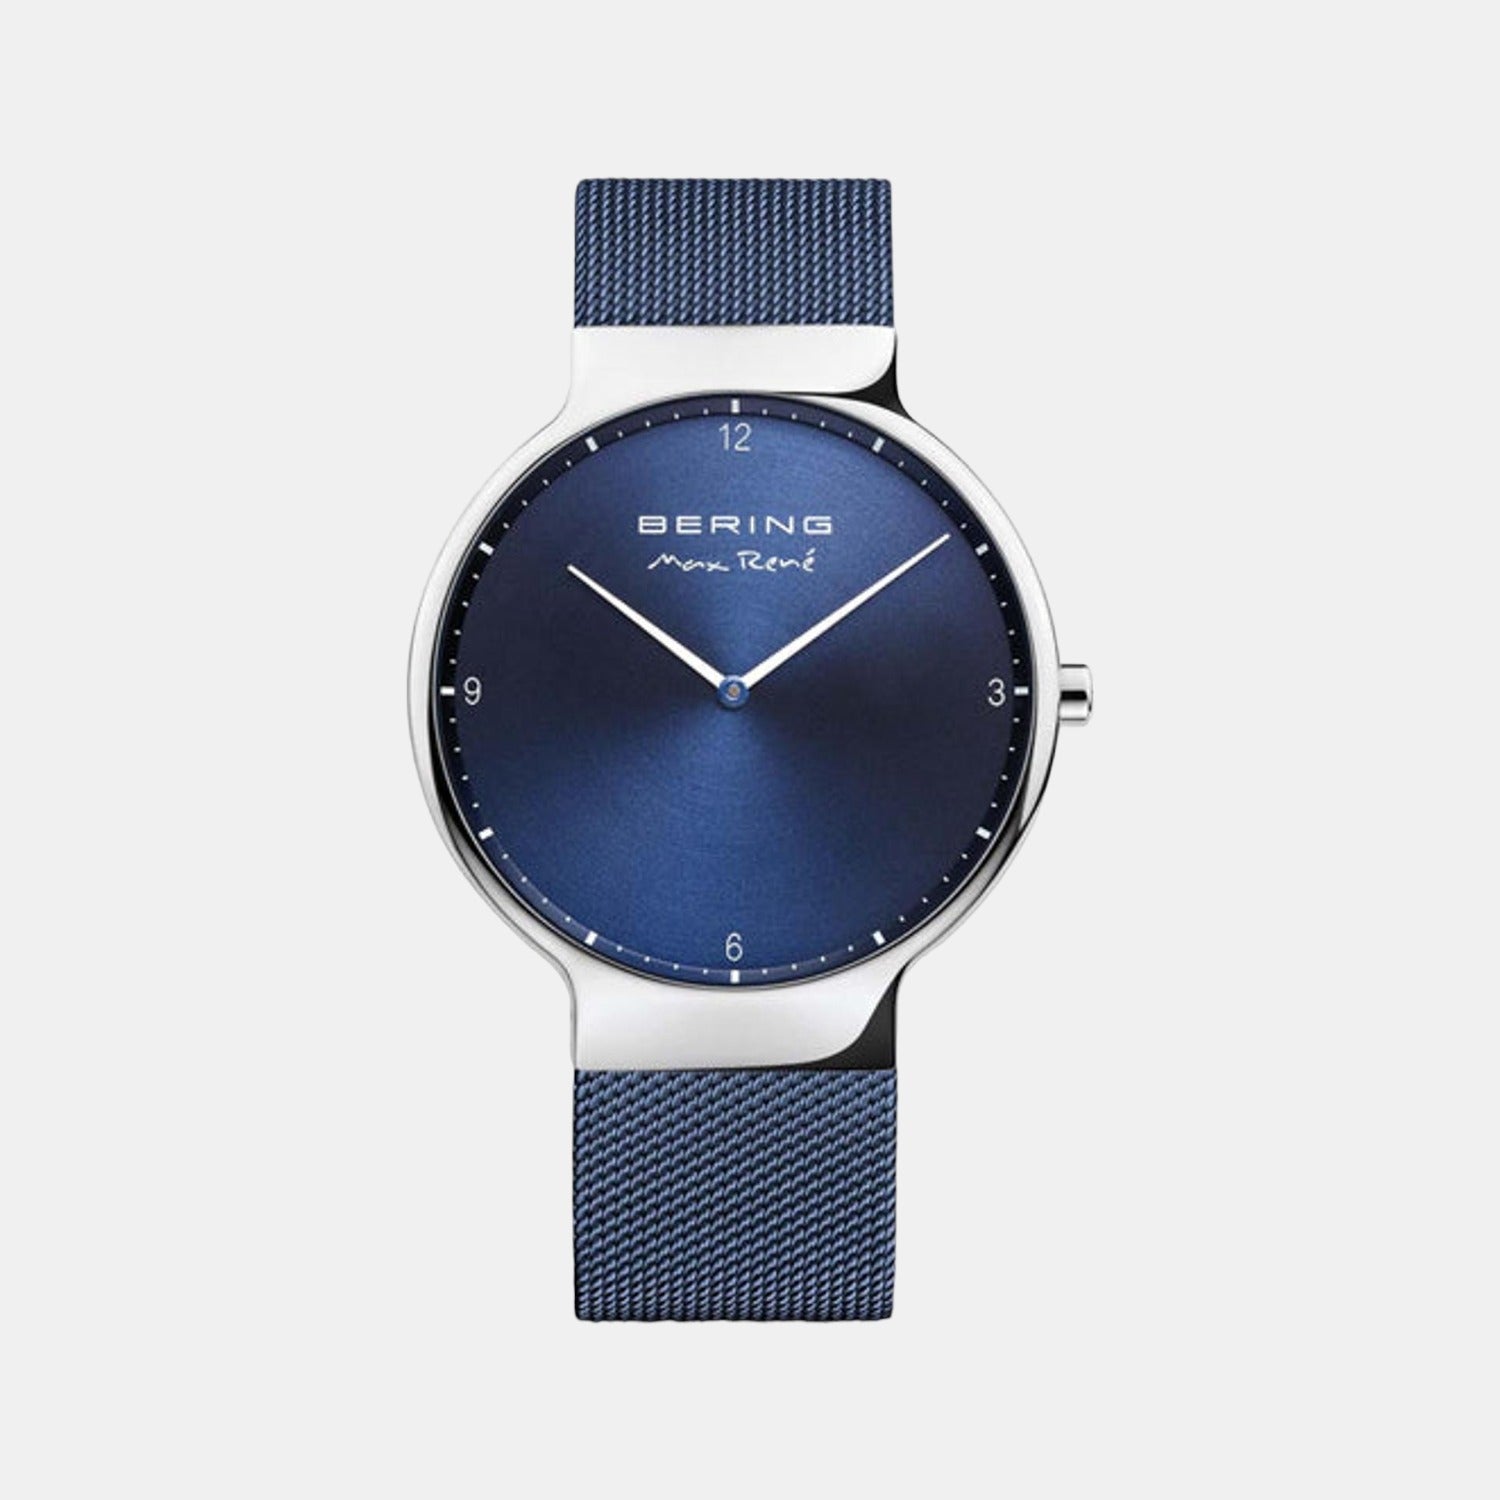 Male Blue Analog Stainless Steel Watch 15540-307